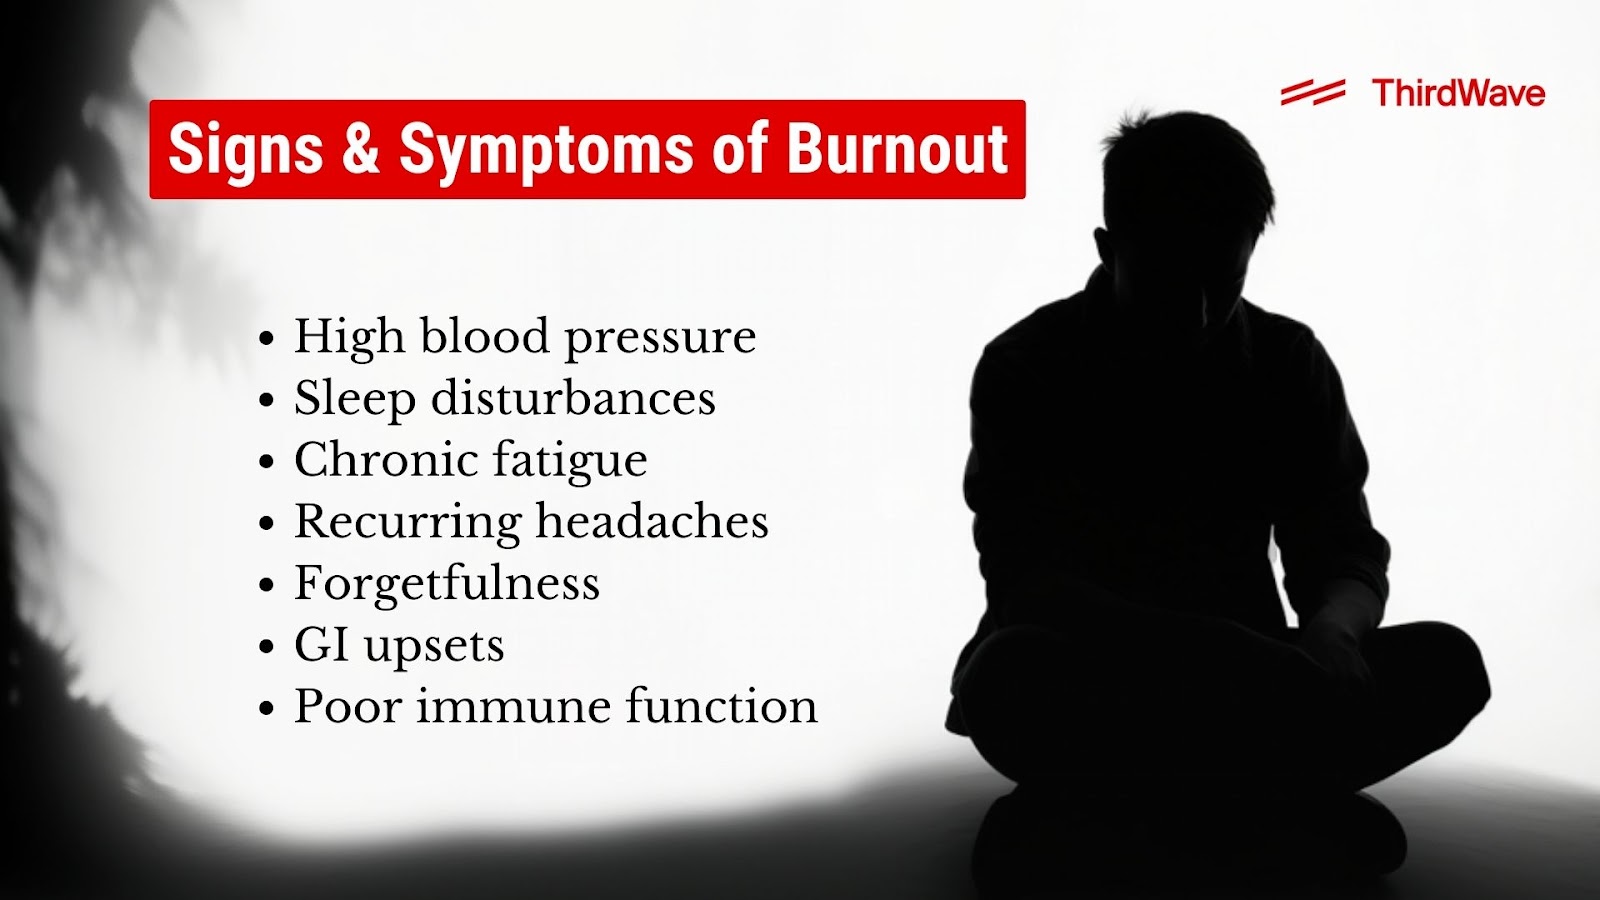 Third Wave infographic on signs & symptoms of burnout